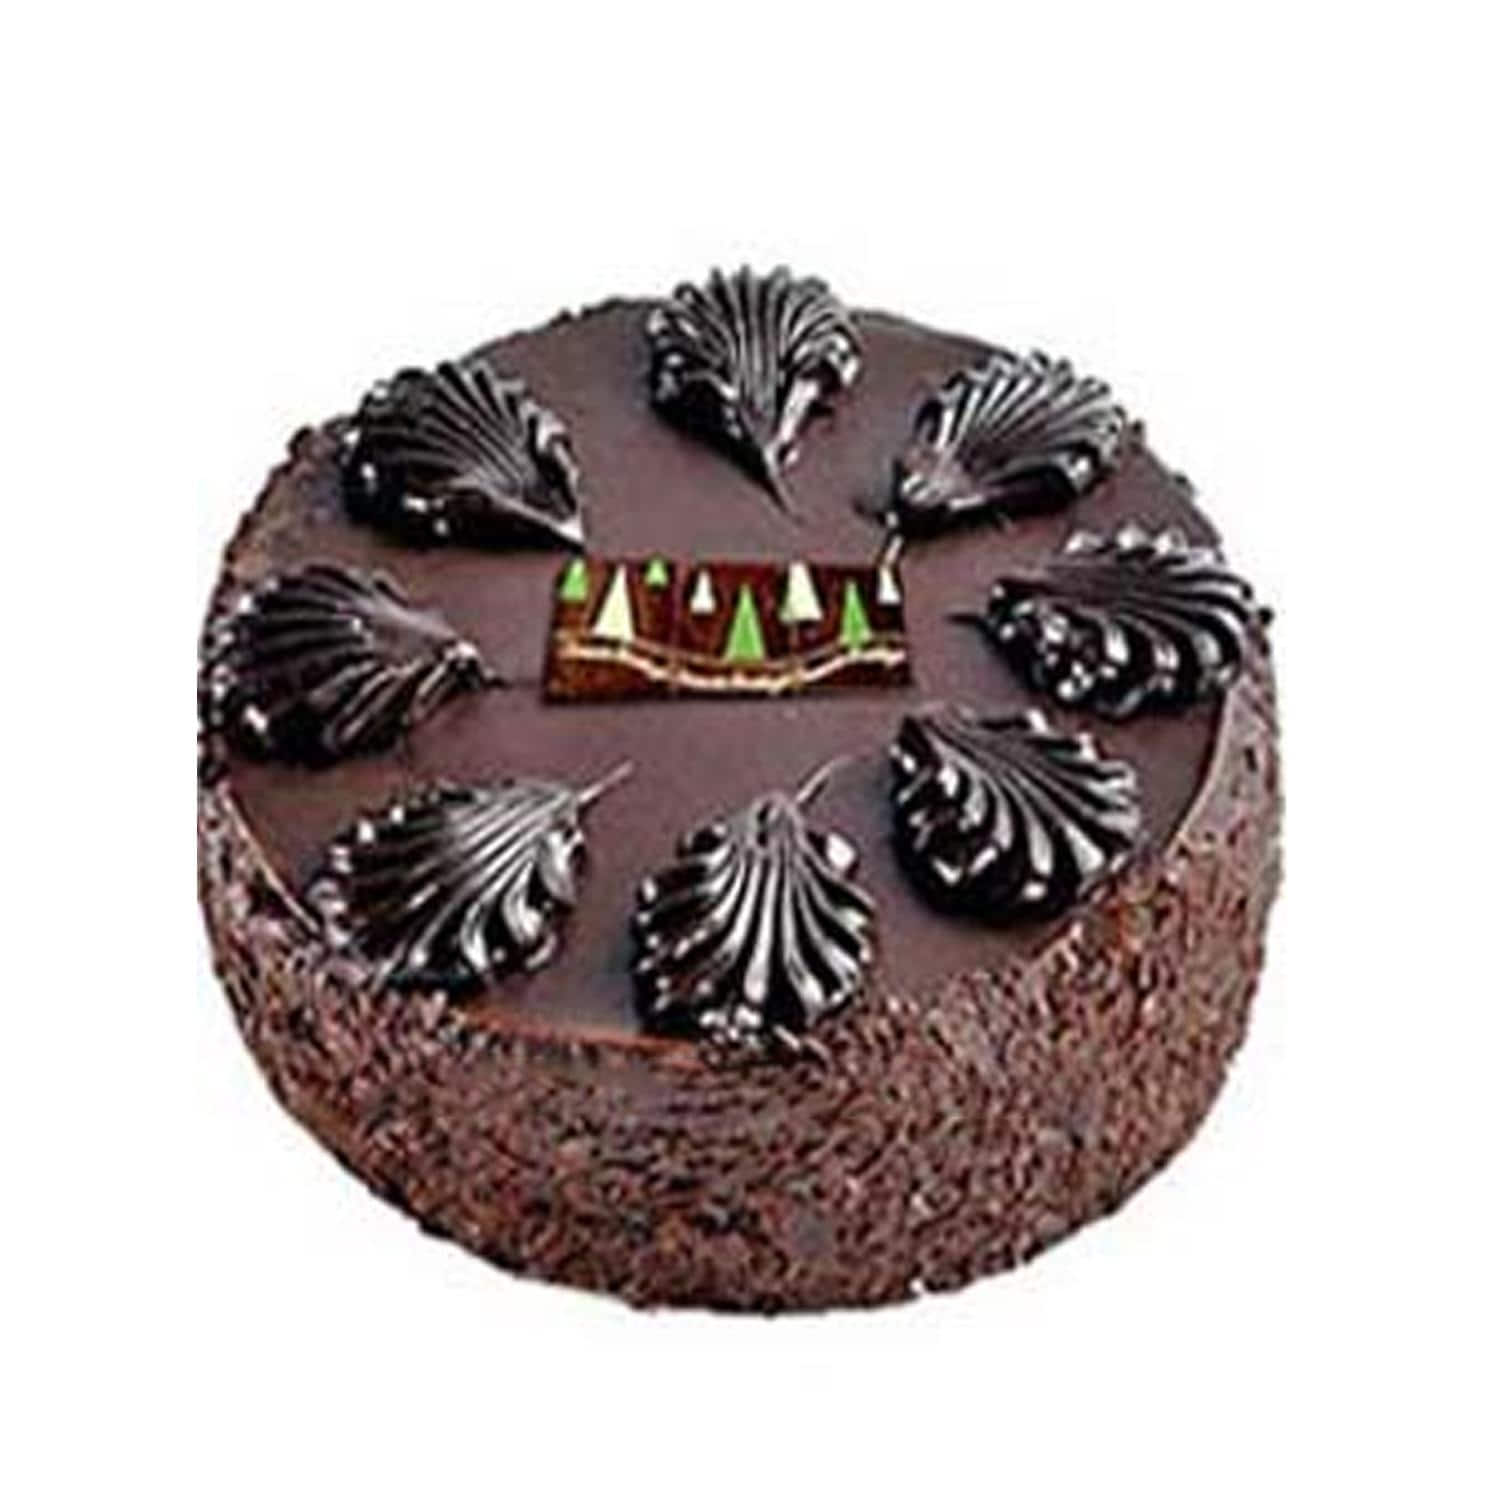 Rich Chocolate Cake Delight - The Cake Town